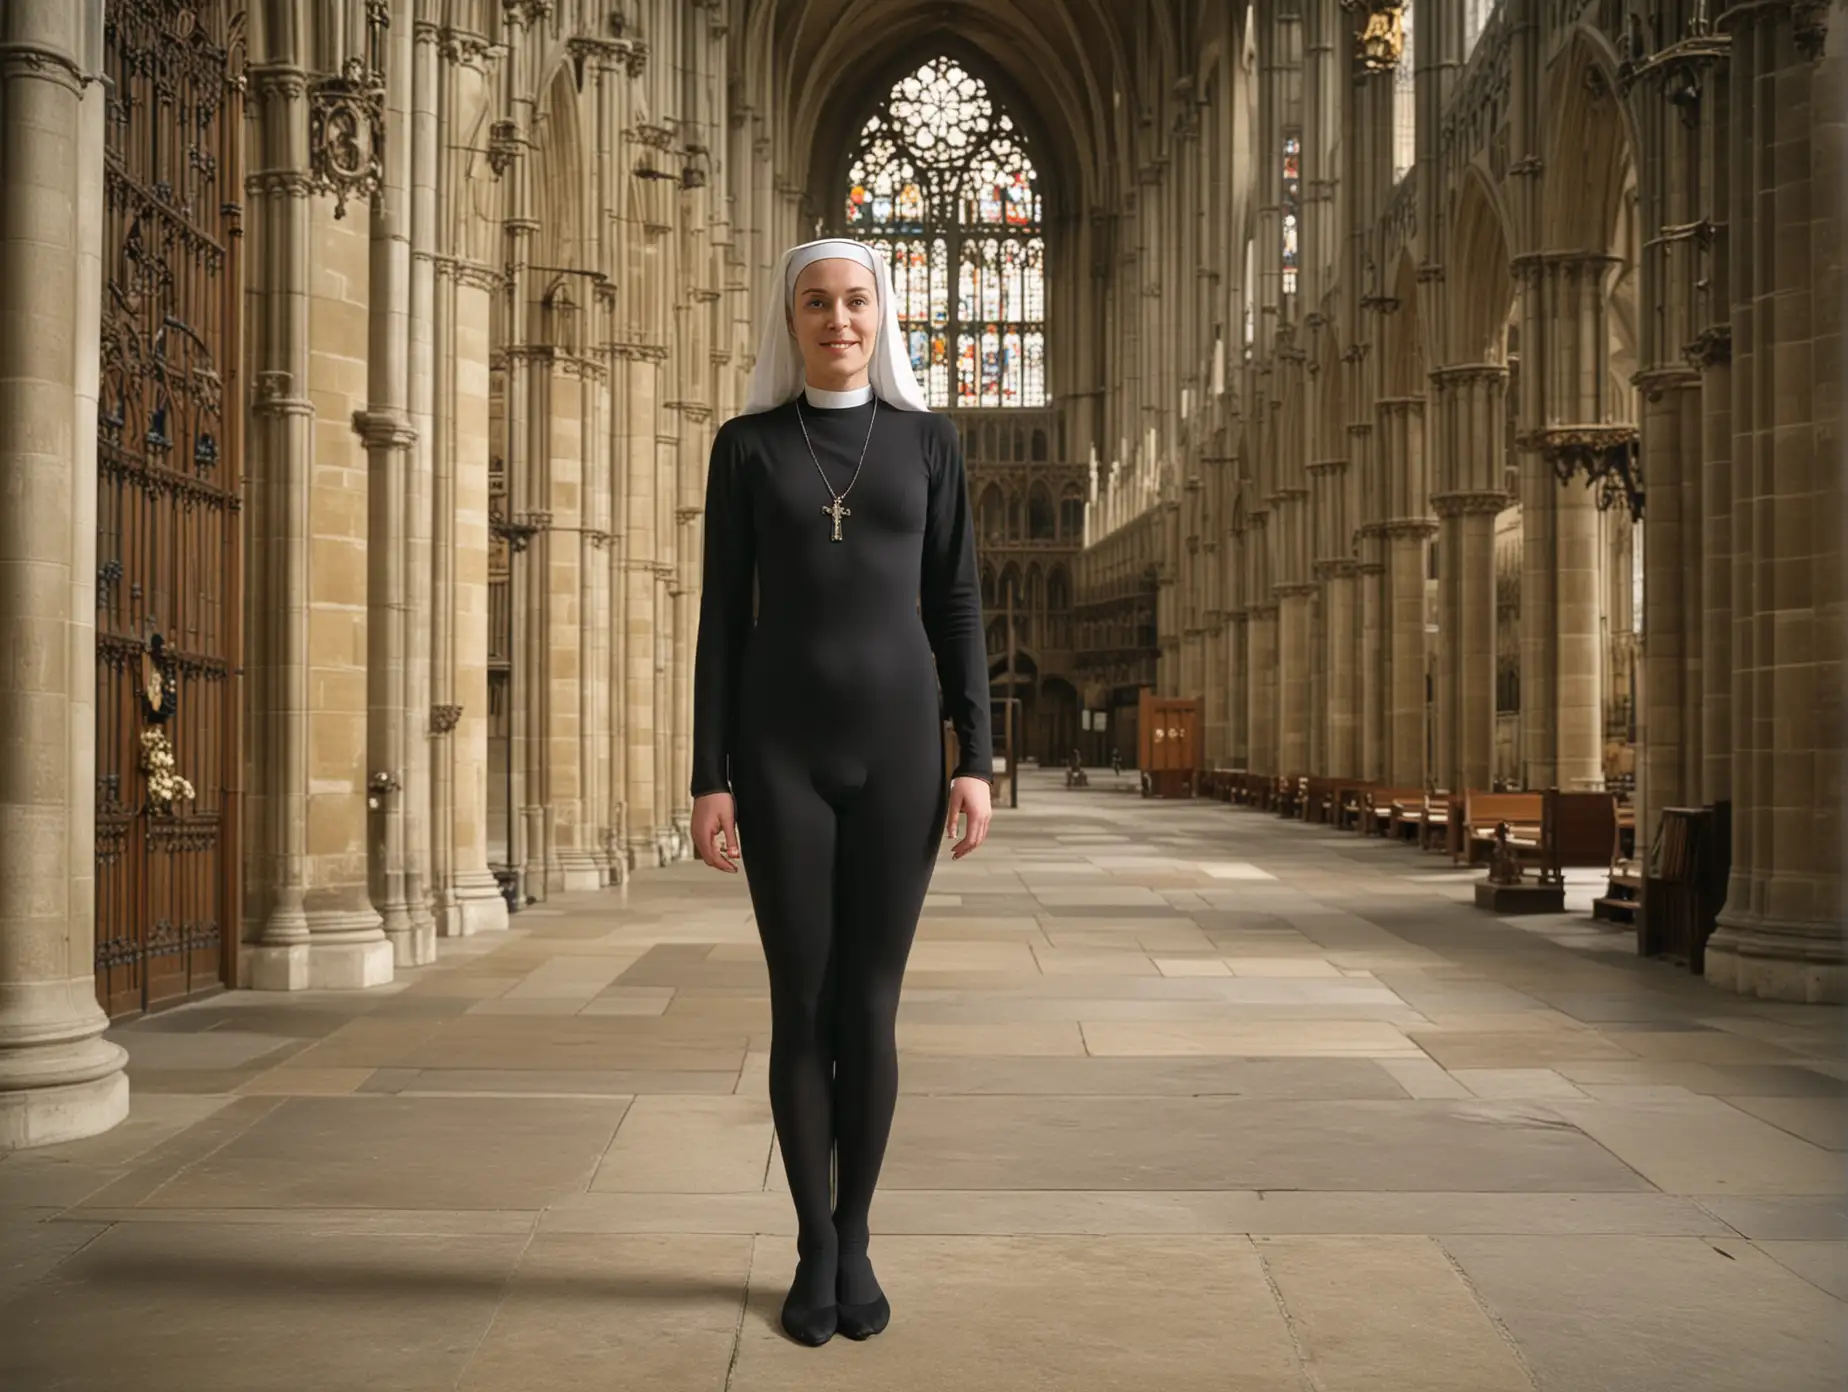 35 year old nun, wearing long sleeved leotard, standing in Westminster Abbey, full body view, full colour